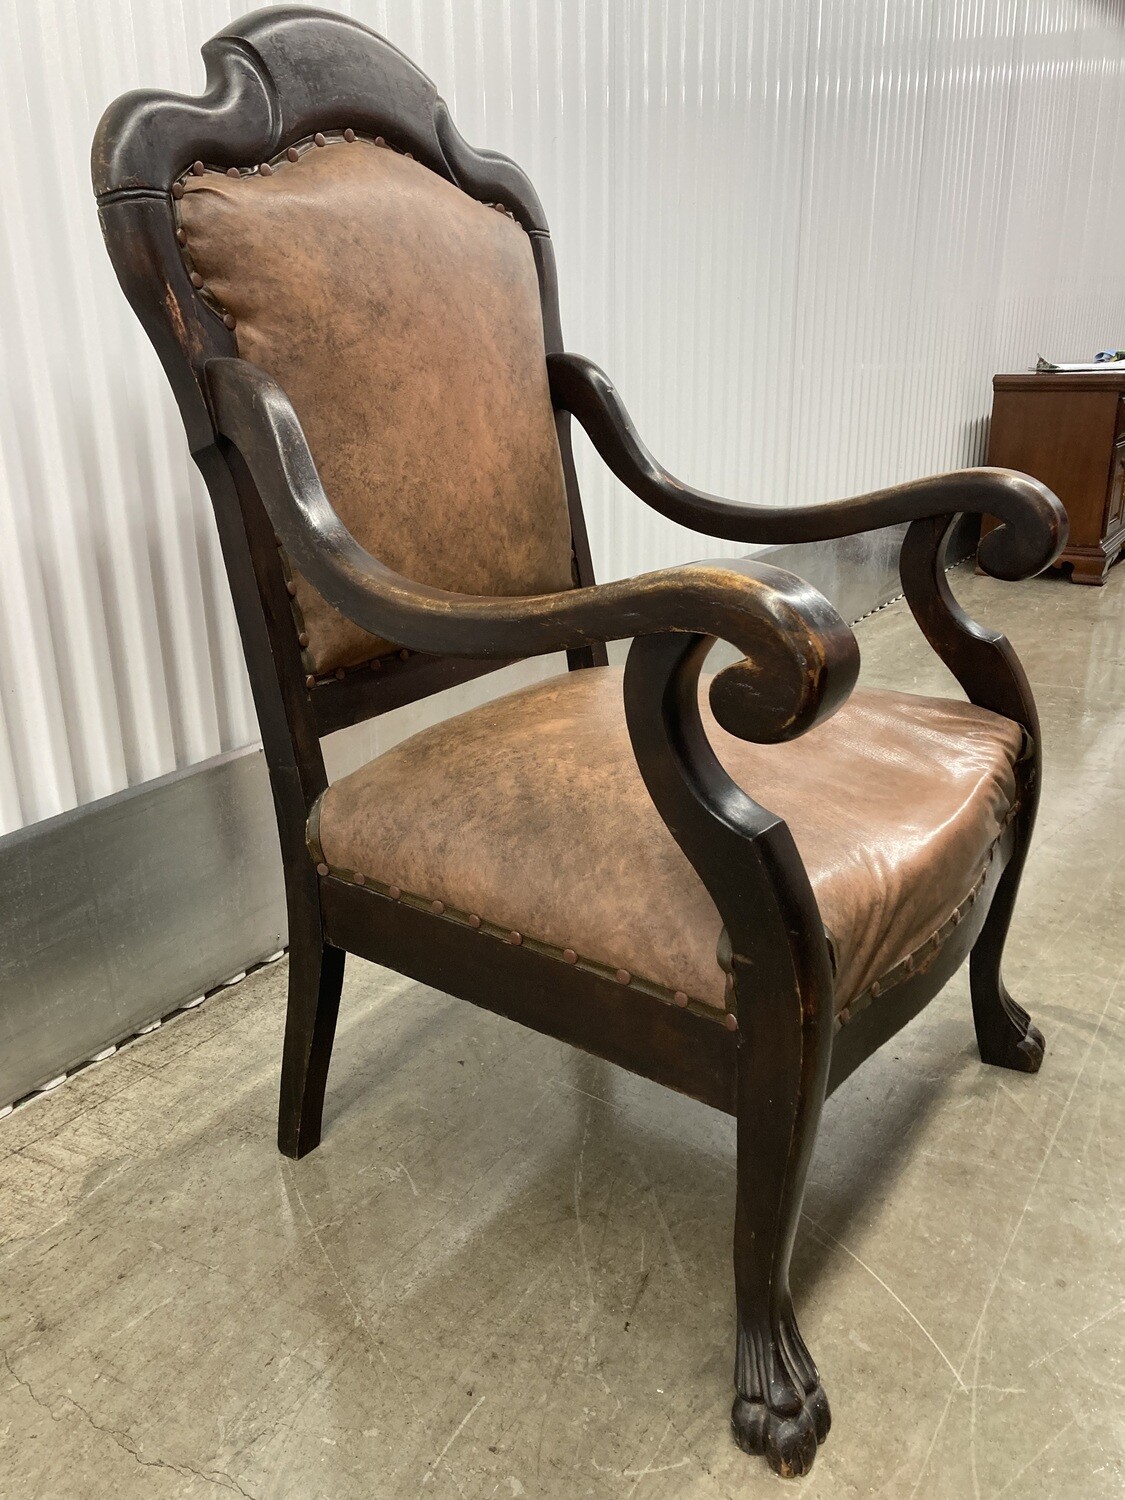 Antique Clawfoot Arm Chair, leather padding #2114